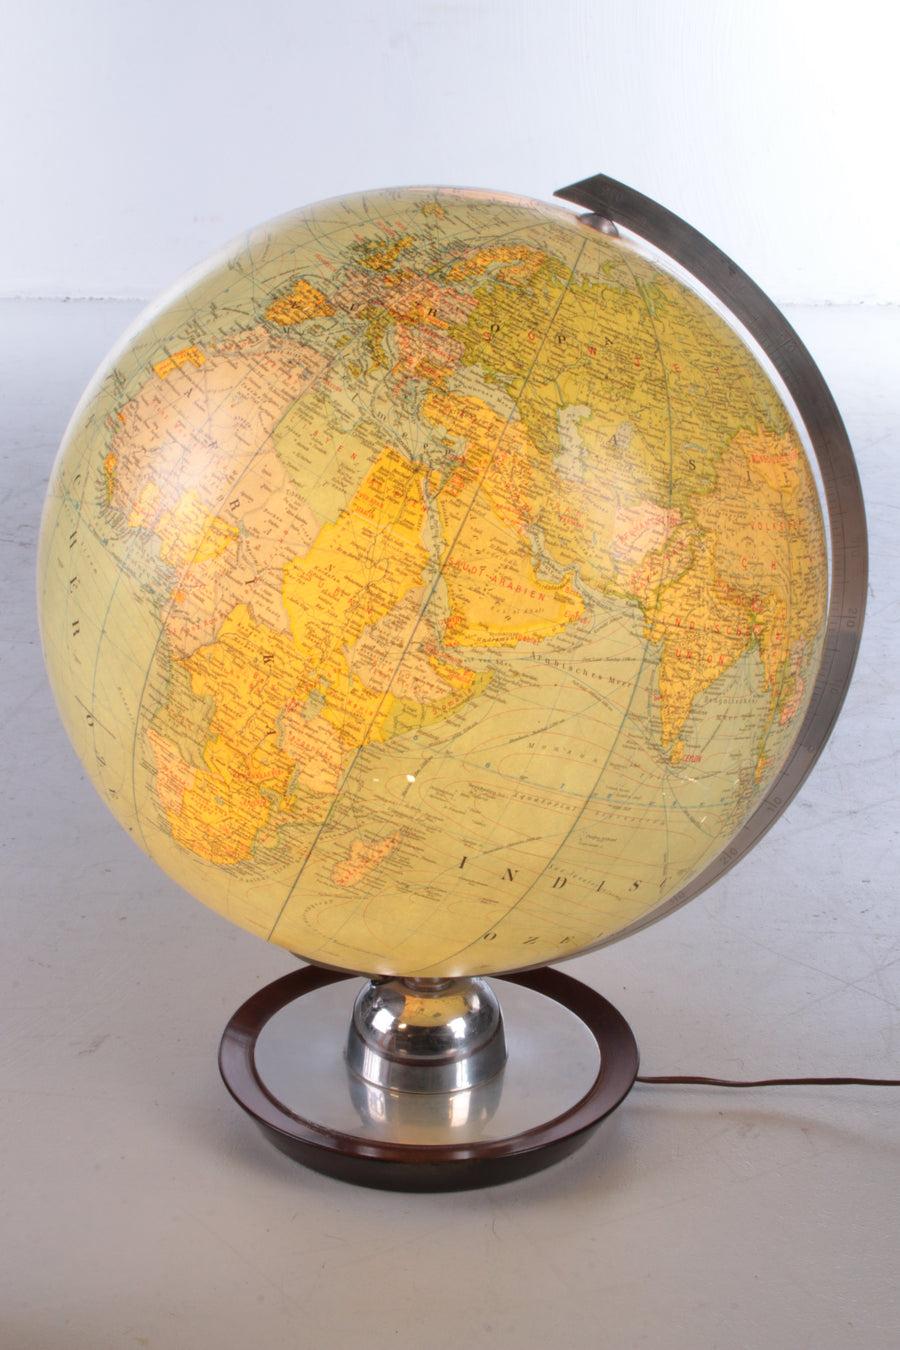 Midcentury Glass Globe With Light by Jro Verlag Munchen, Germany

This beautiful vintage globe has a chrome base.

This globe is from the 1960s and was made in Germany.

Created by JRO Verlag Munich.

The globe is equipped with lighting. In